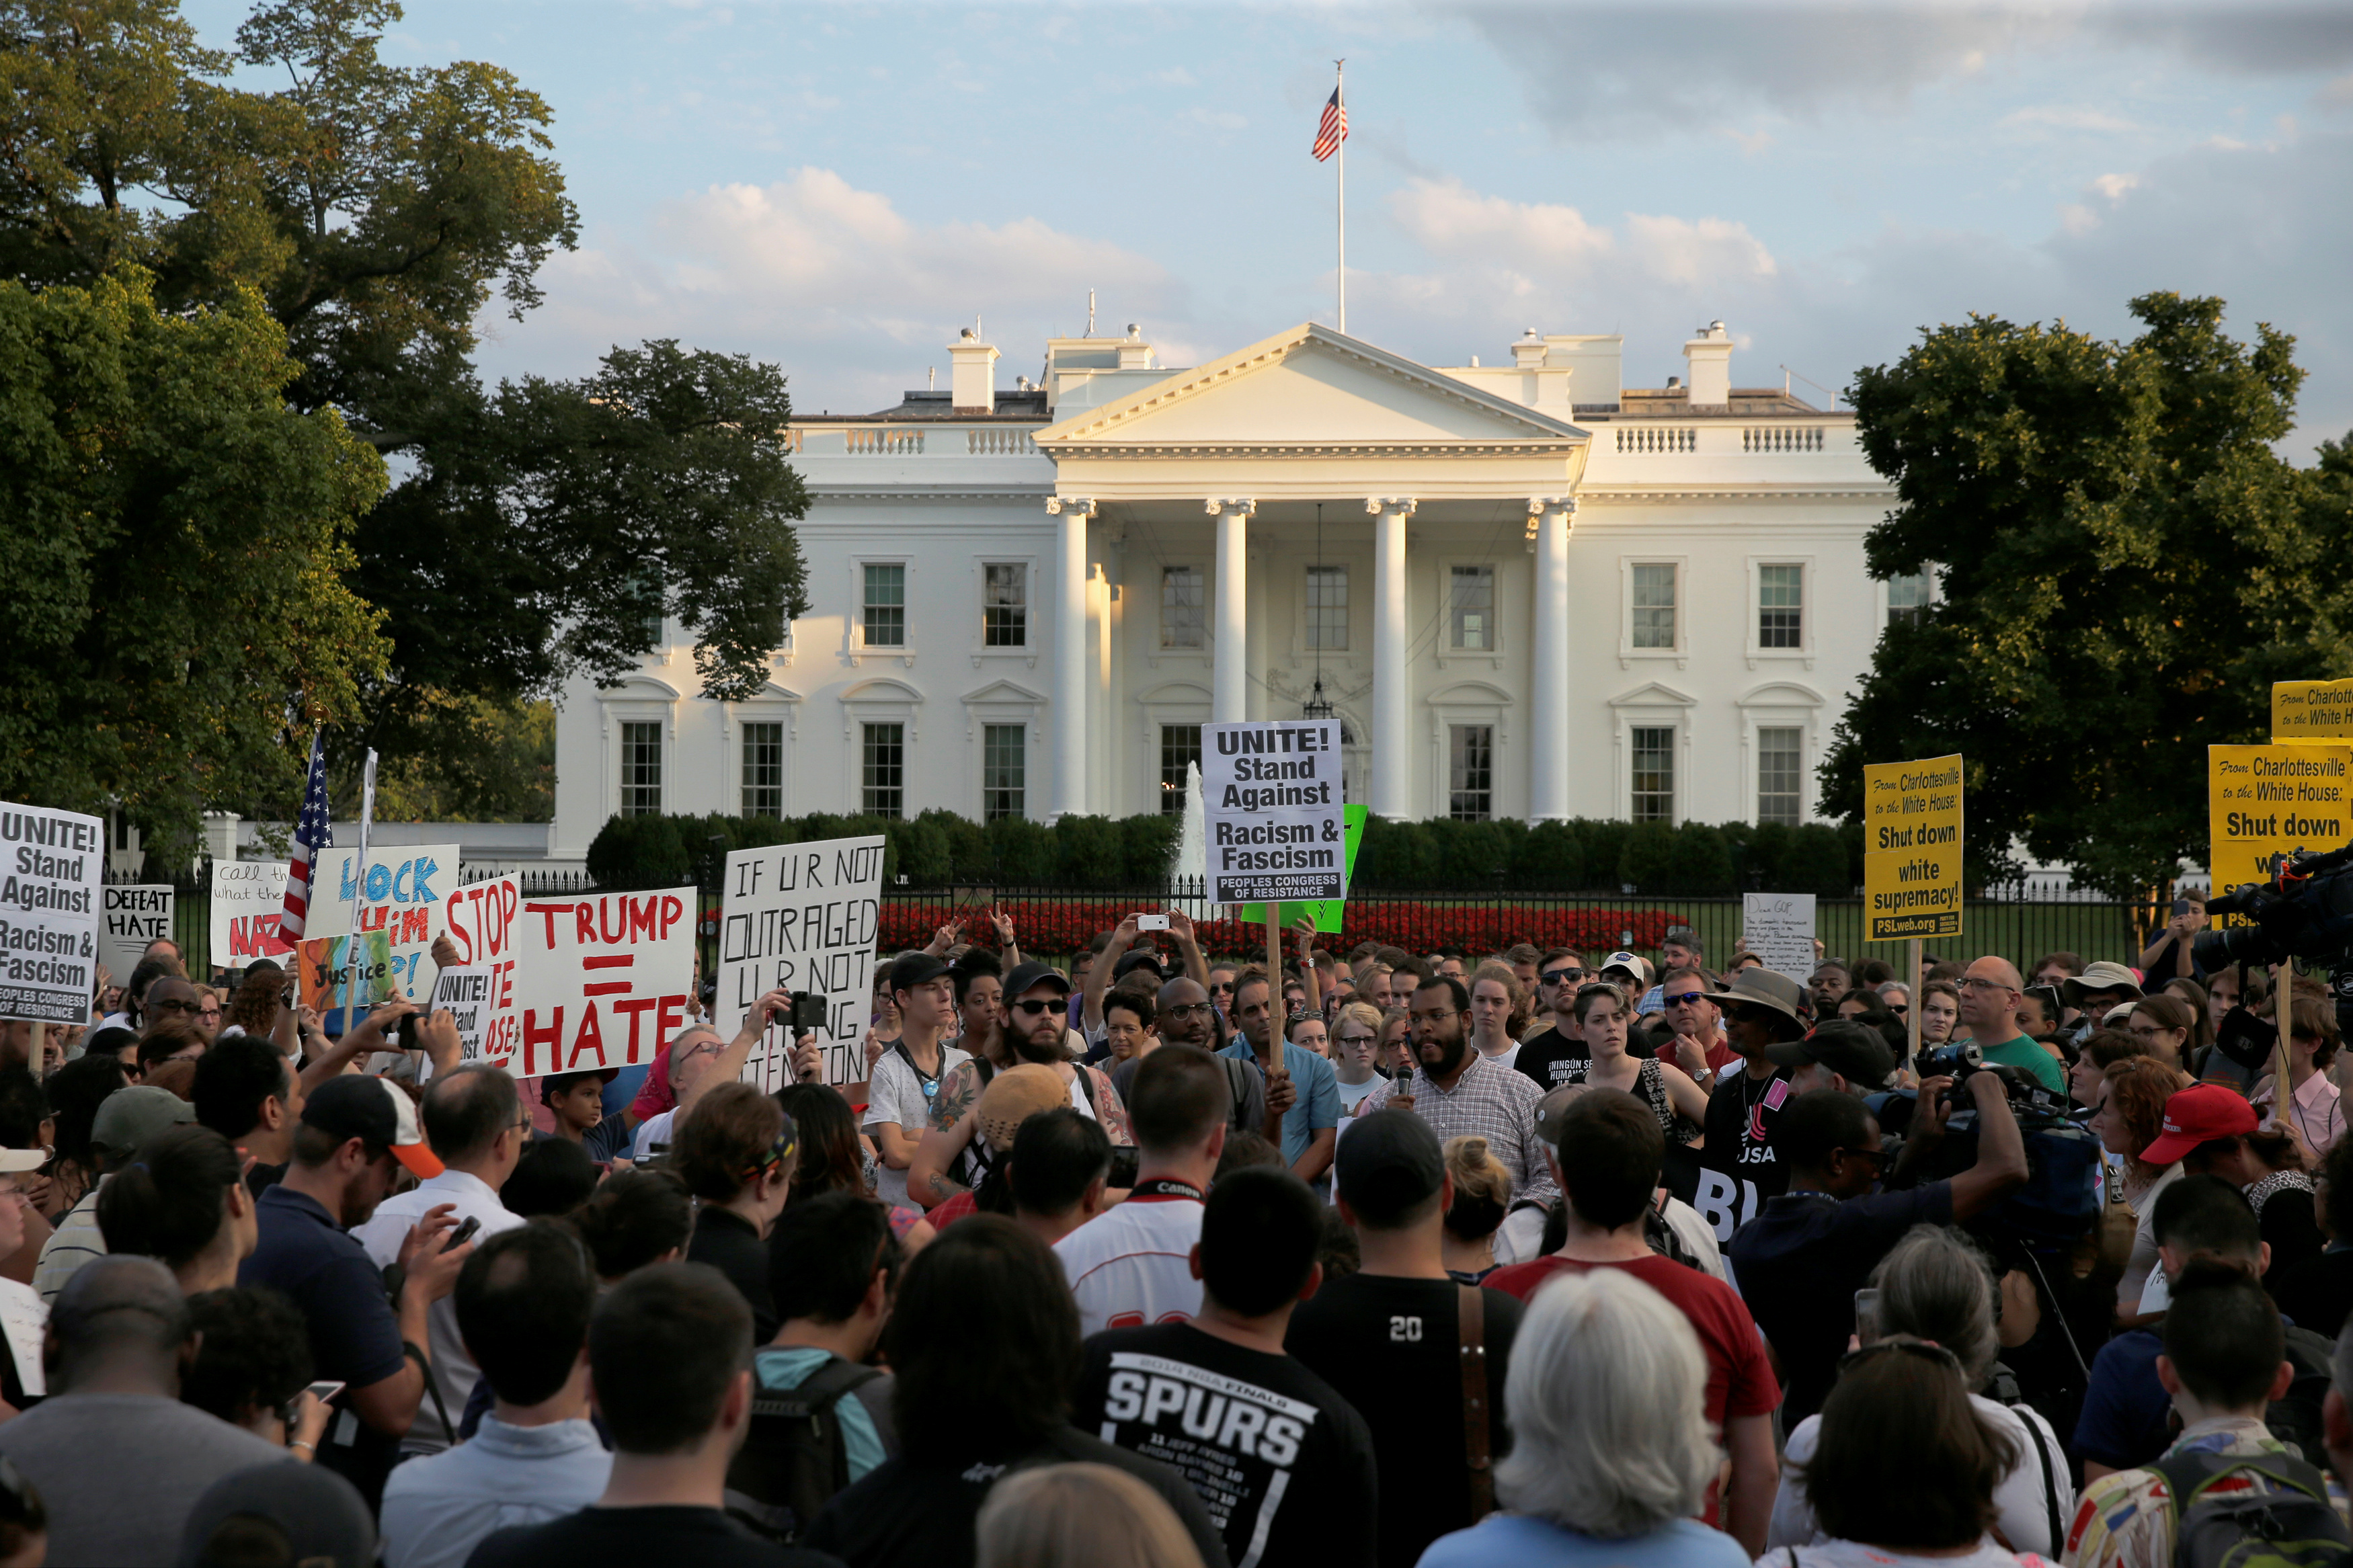 Protesters outside the White House after the Charlottesville events